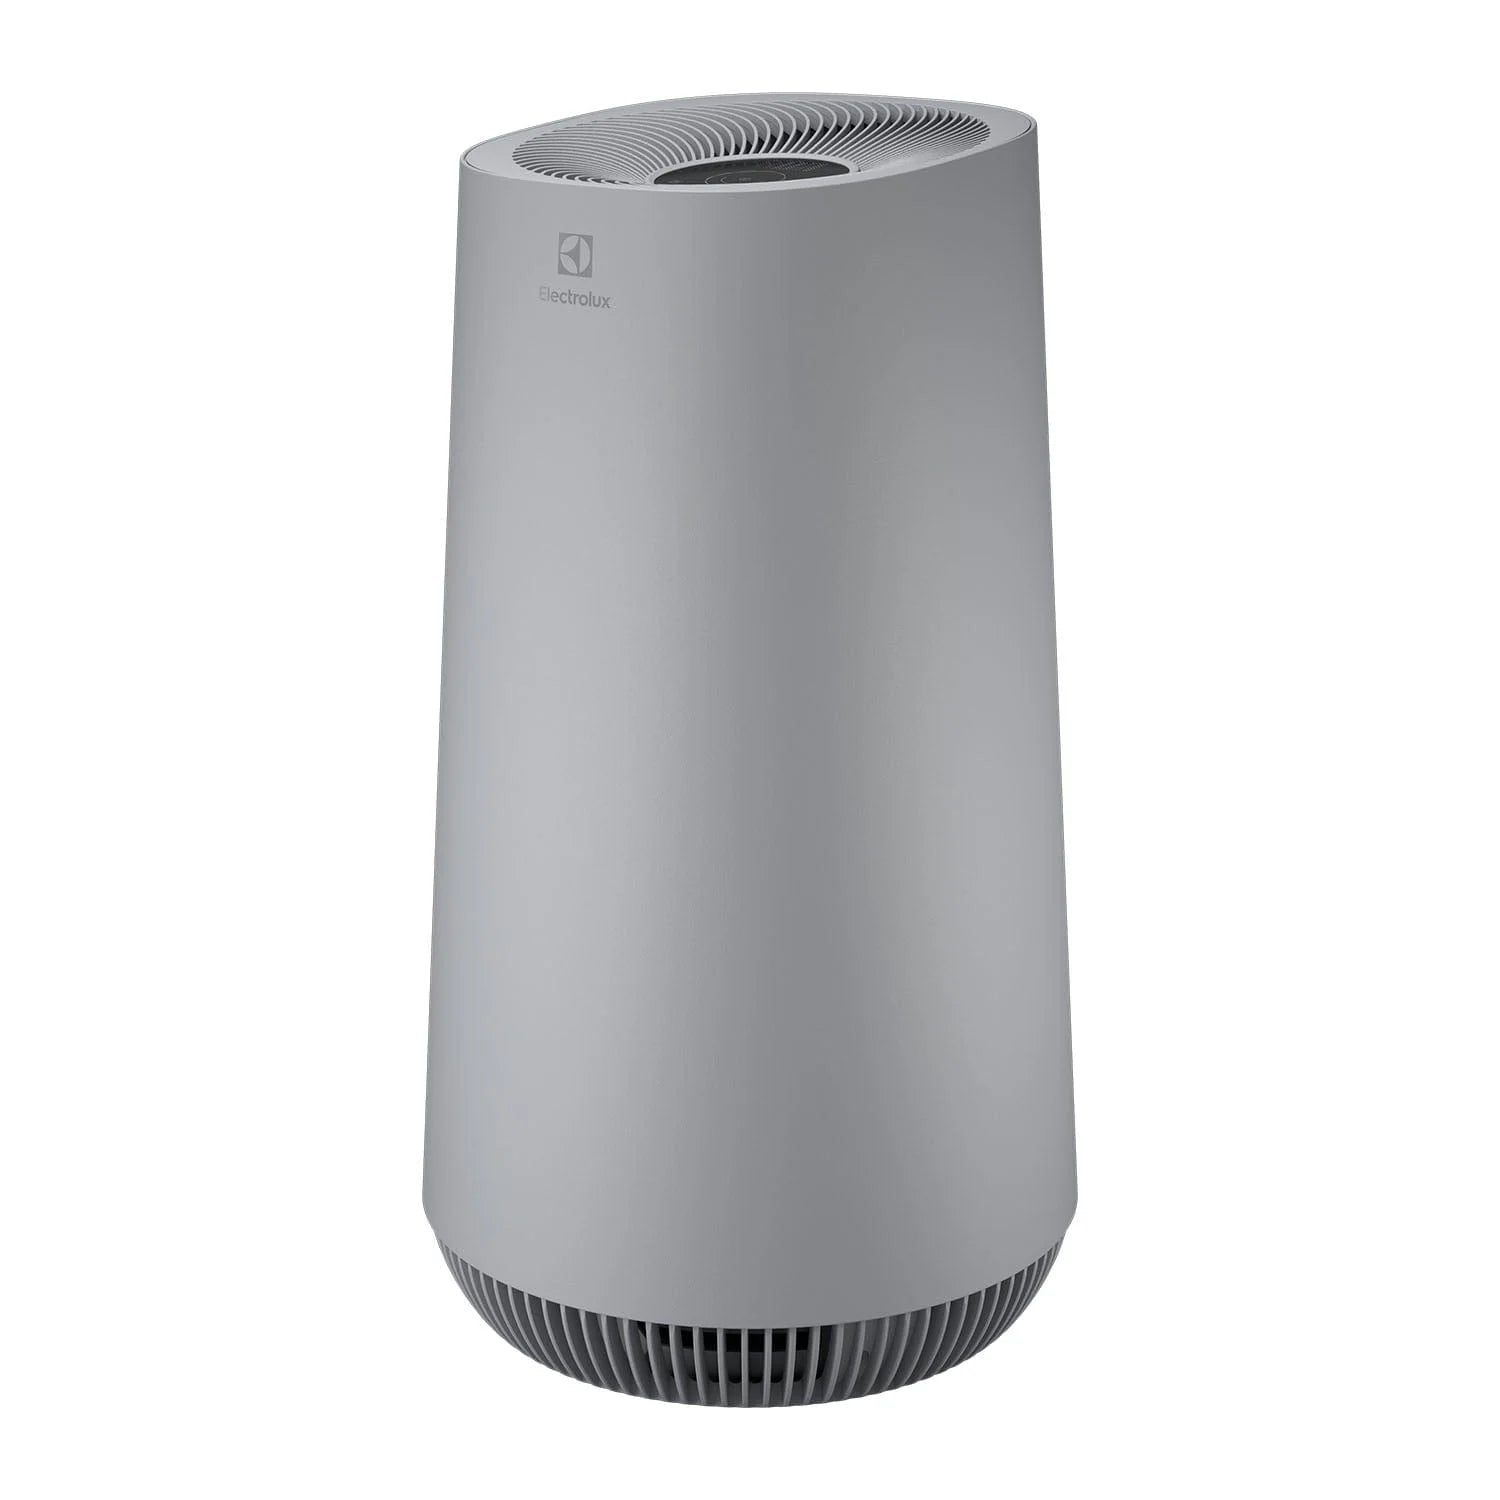 Electrolux Air Purifier with 3 Stage Filtration | Color Gray | Best Home Appliances and Electronics in Bahrain | Halabh